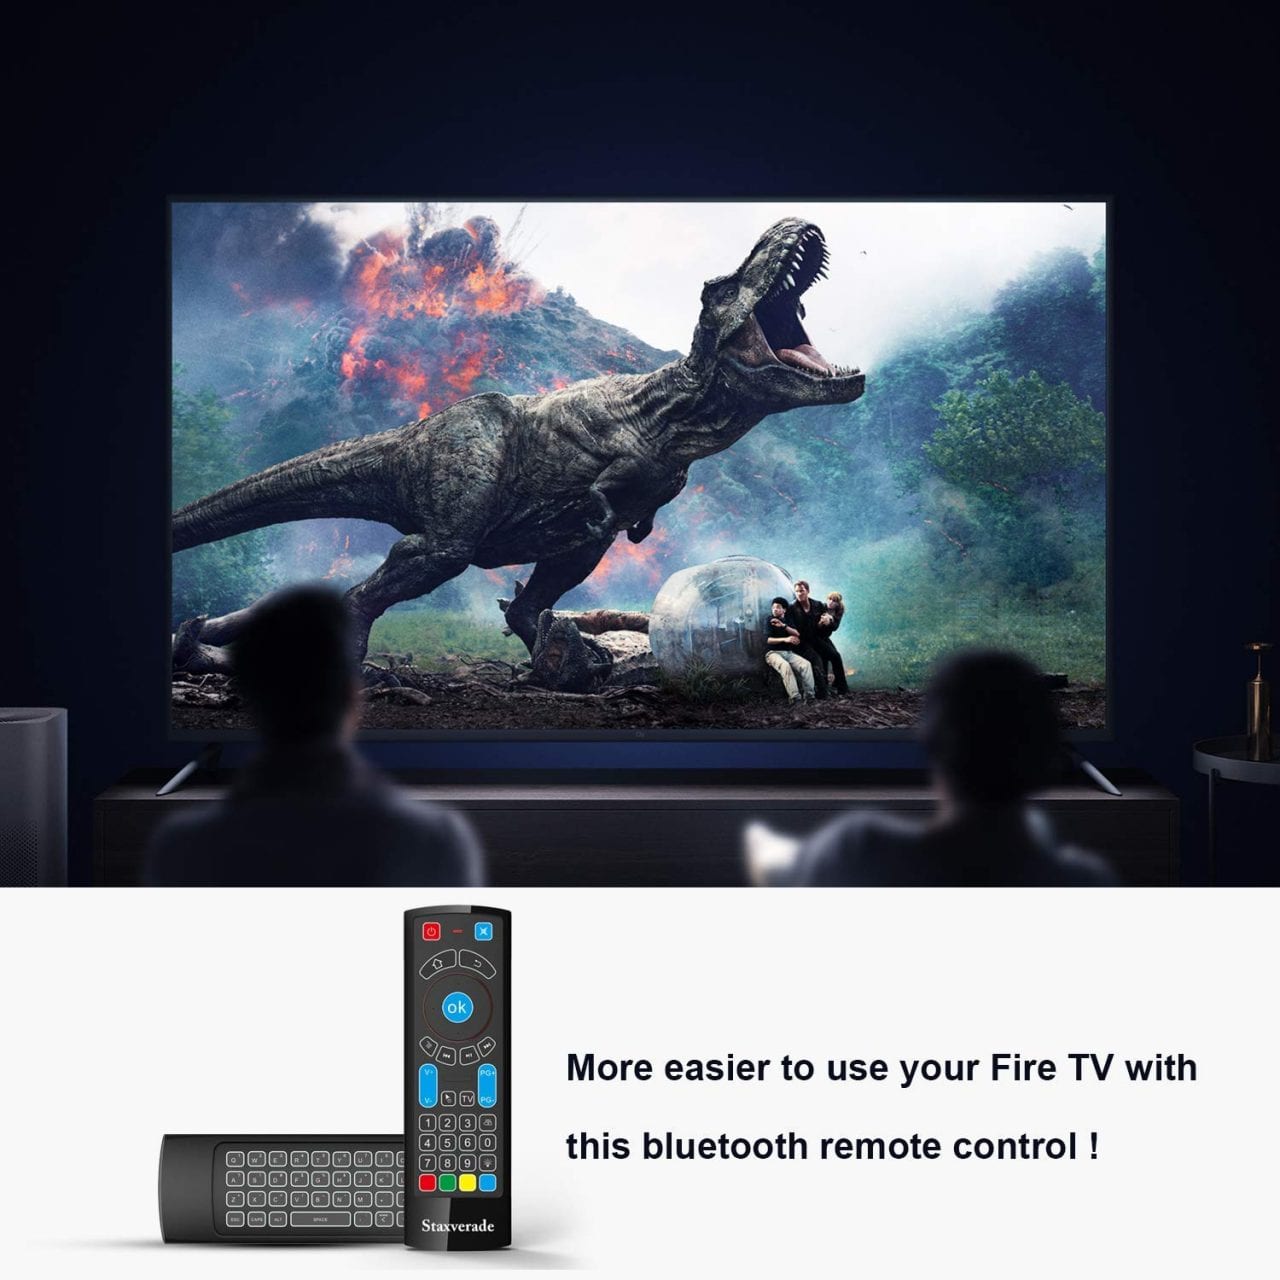 Air Remote Control with Keyboard/Air Remote Mouse Bluetooth Remote Specifically Compatible with  Fire TV and Fire Stick/4K Compatible with Android TV/Box/Windows/Raspberry pi 3